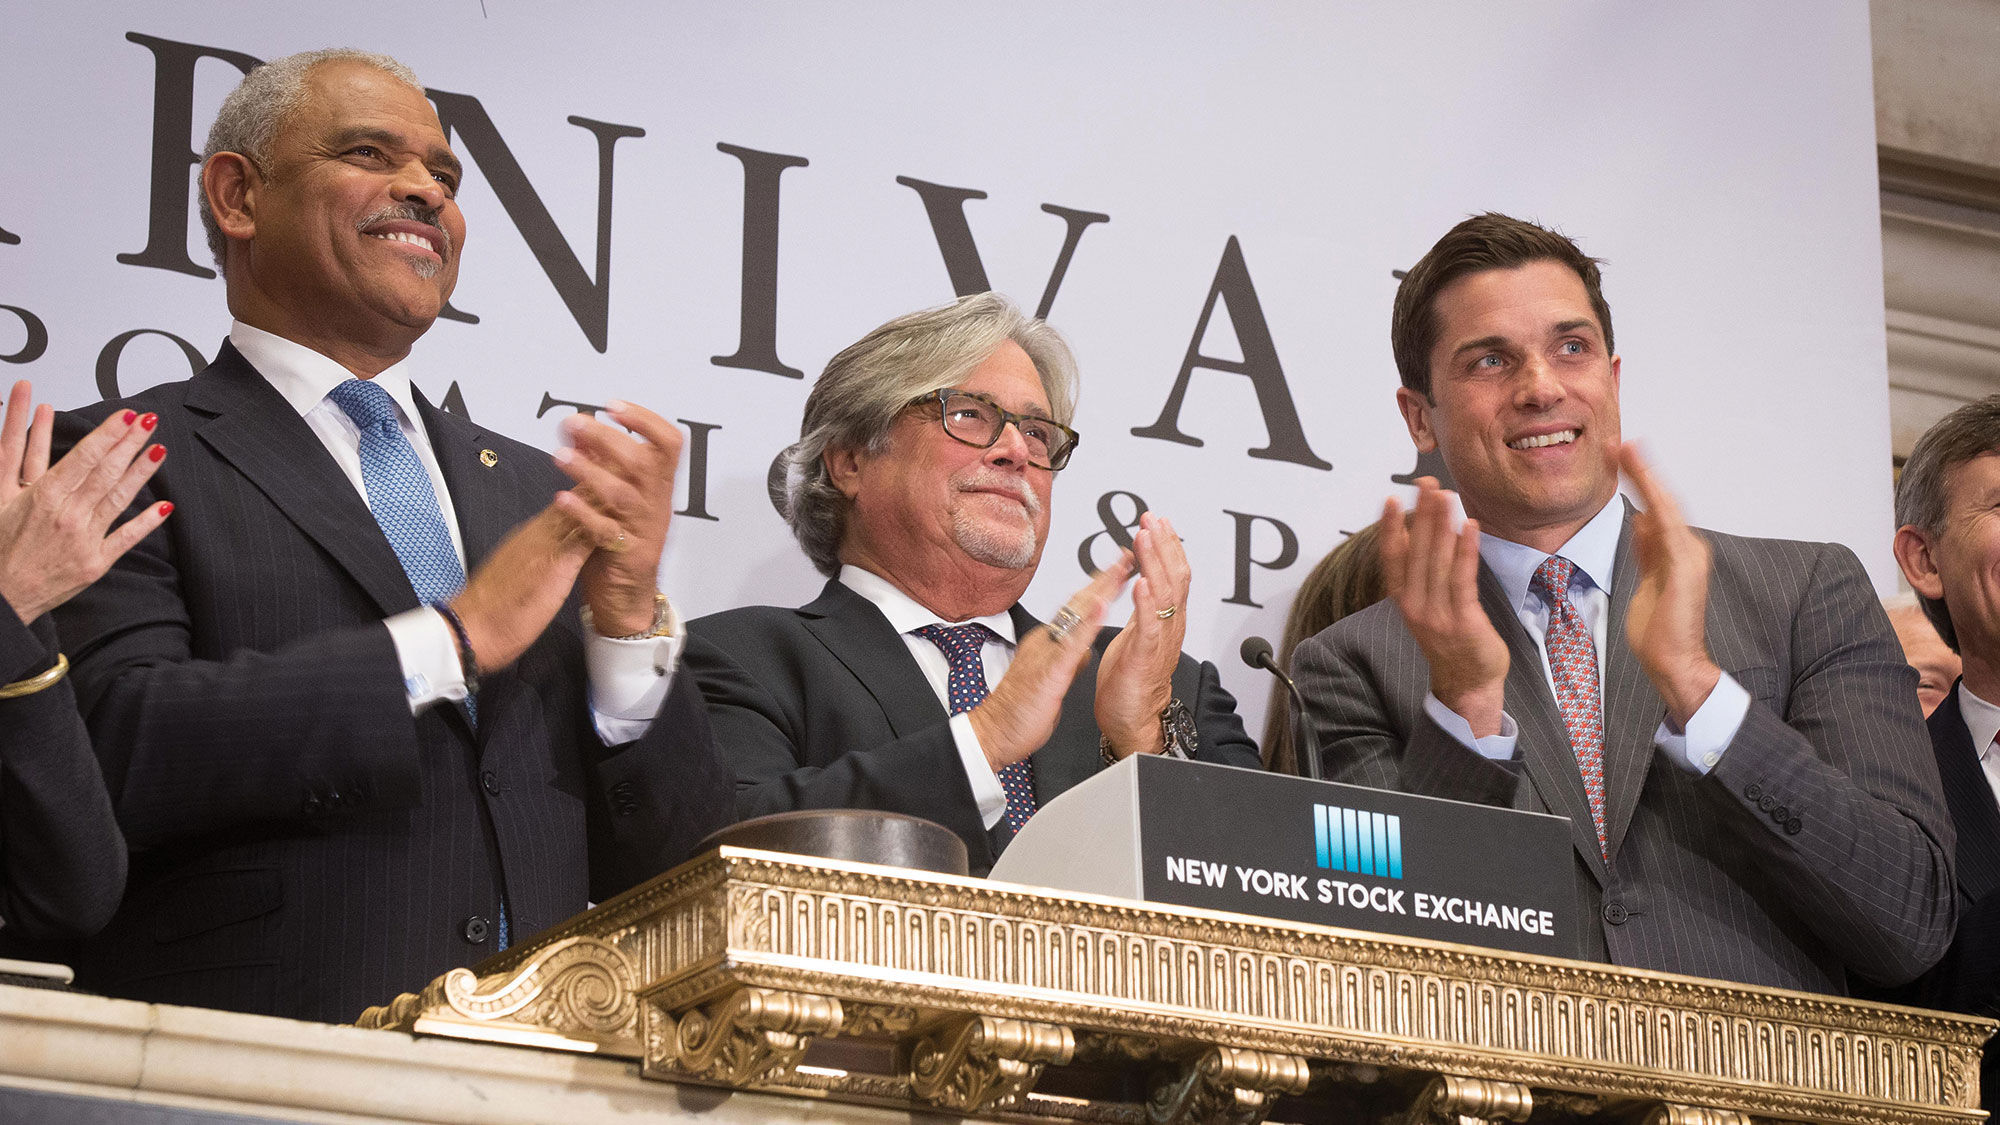 Arnold Donald and Micky Arison (center) at the New York Stock Exchange in 2016.